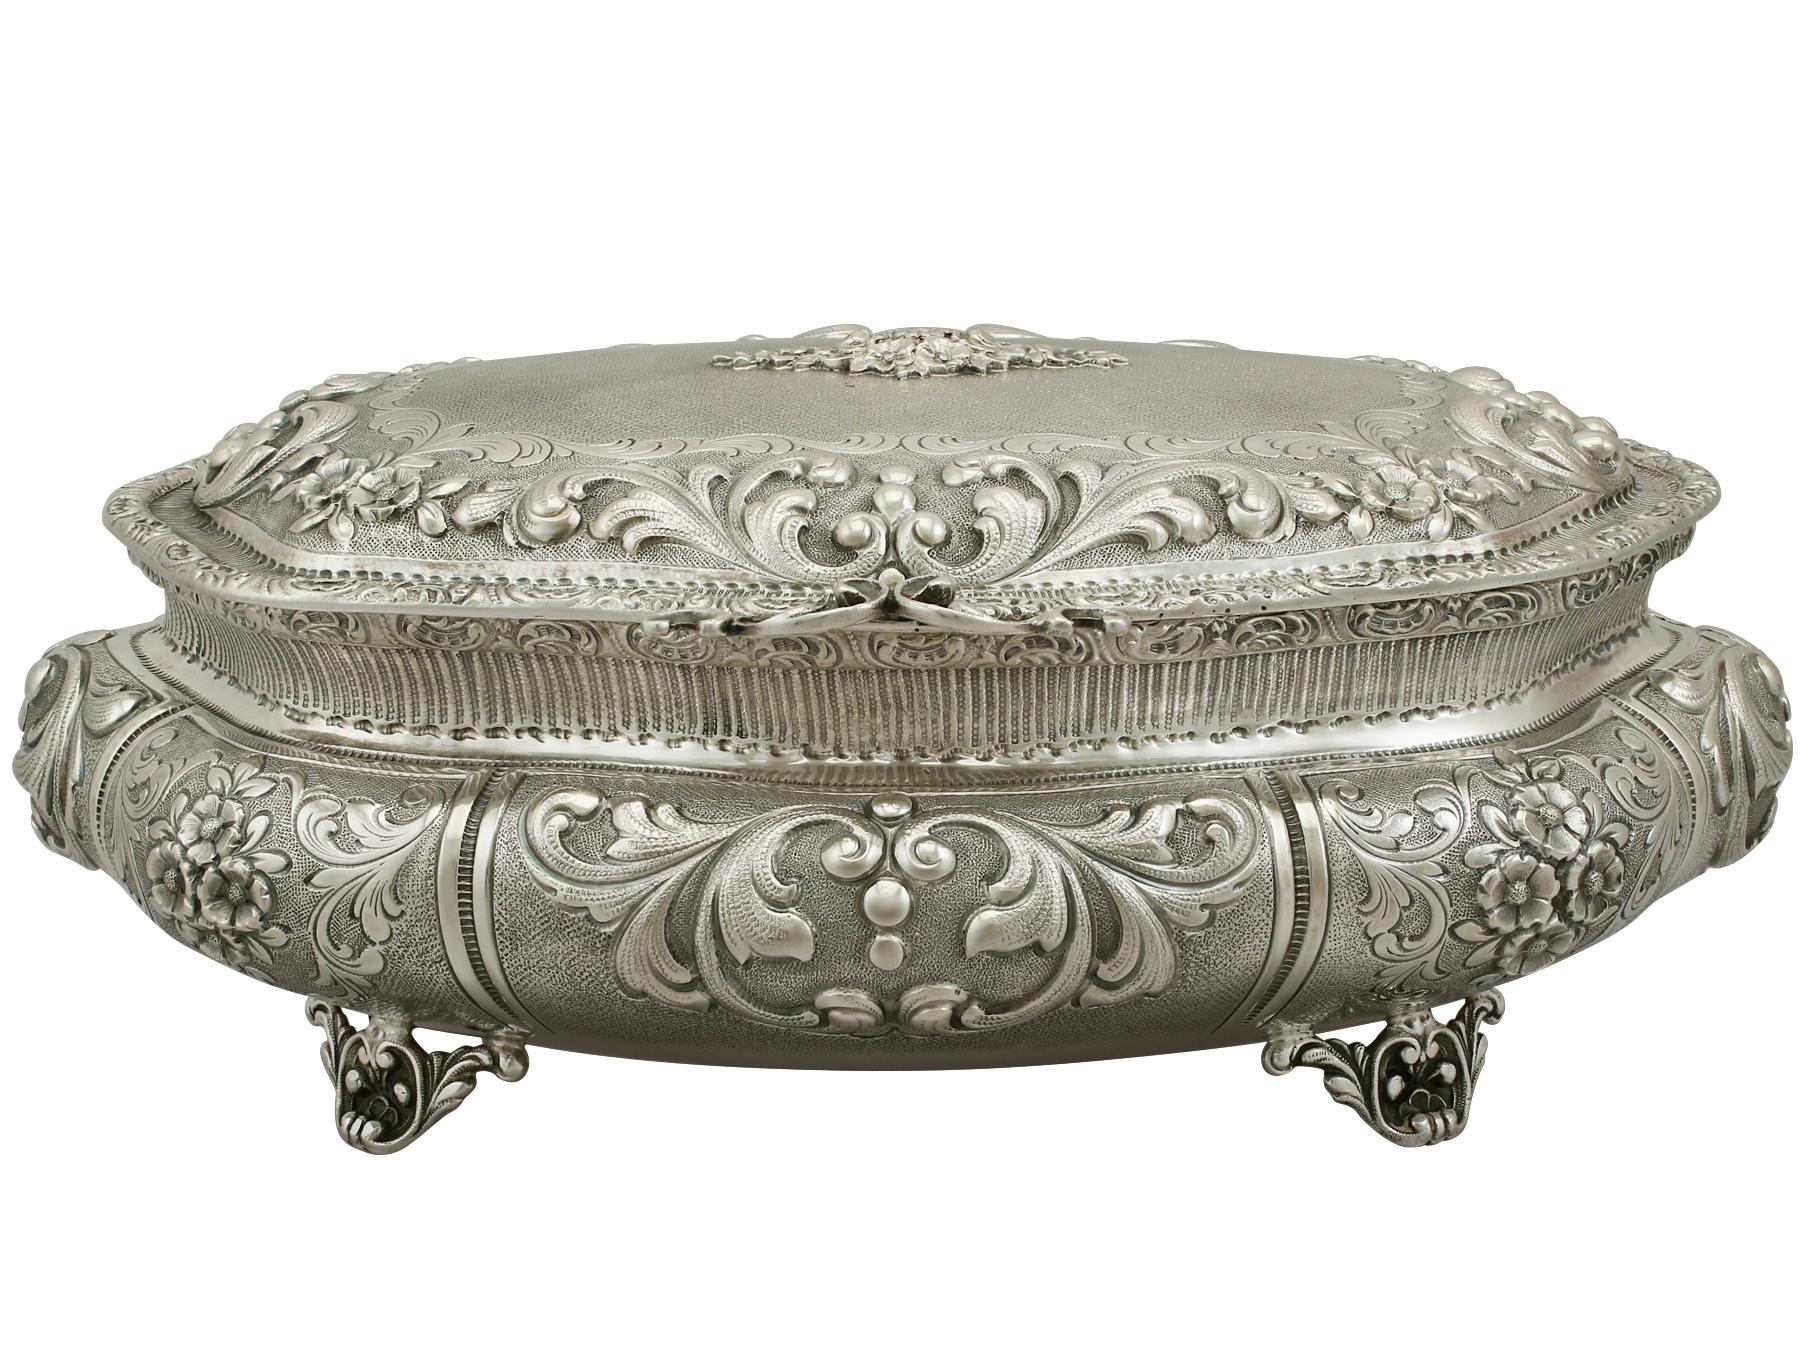 An exceptional, fine and impressive vintage Italian silver jewelry casket; an addition to the ornamental silverware collection.

This exceptional antique Italian silver jewelry casket has an oval shaped form.

The surface of this jewelry casket